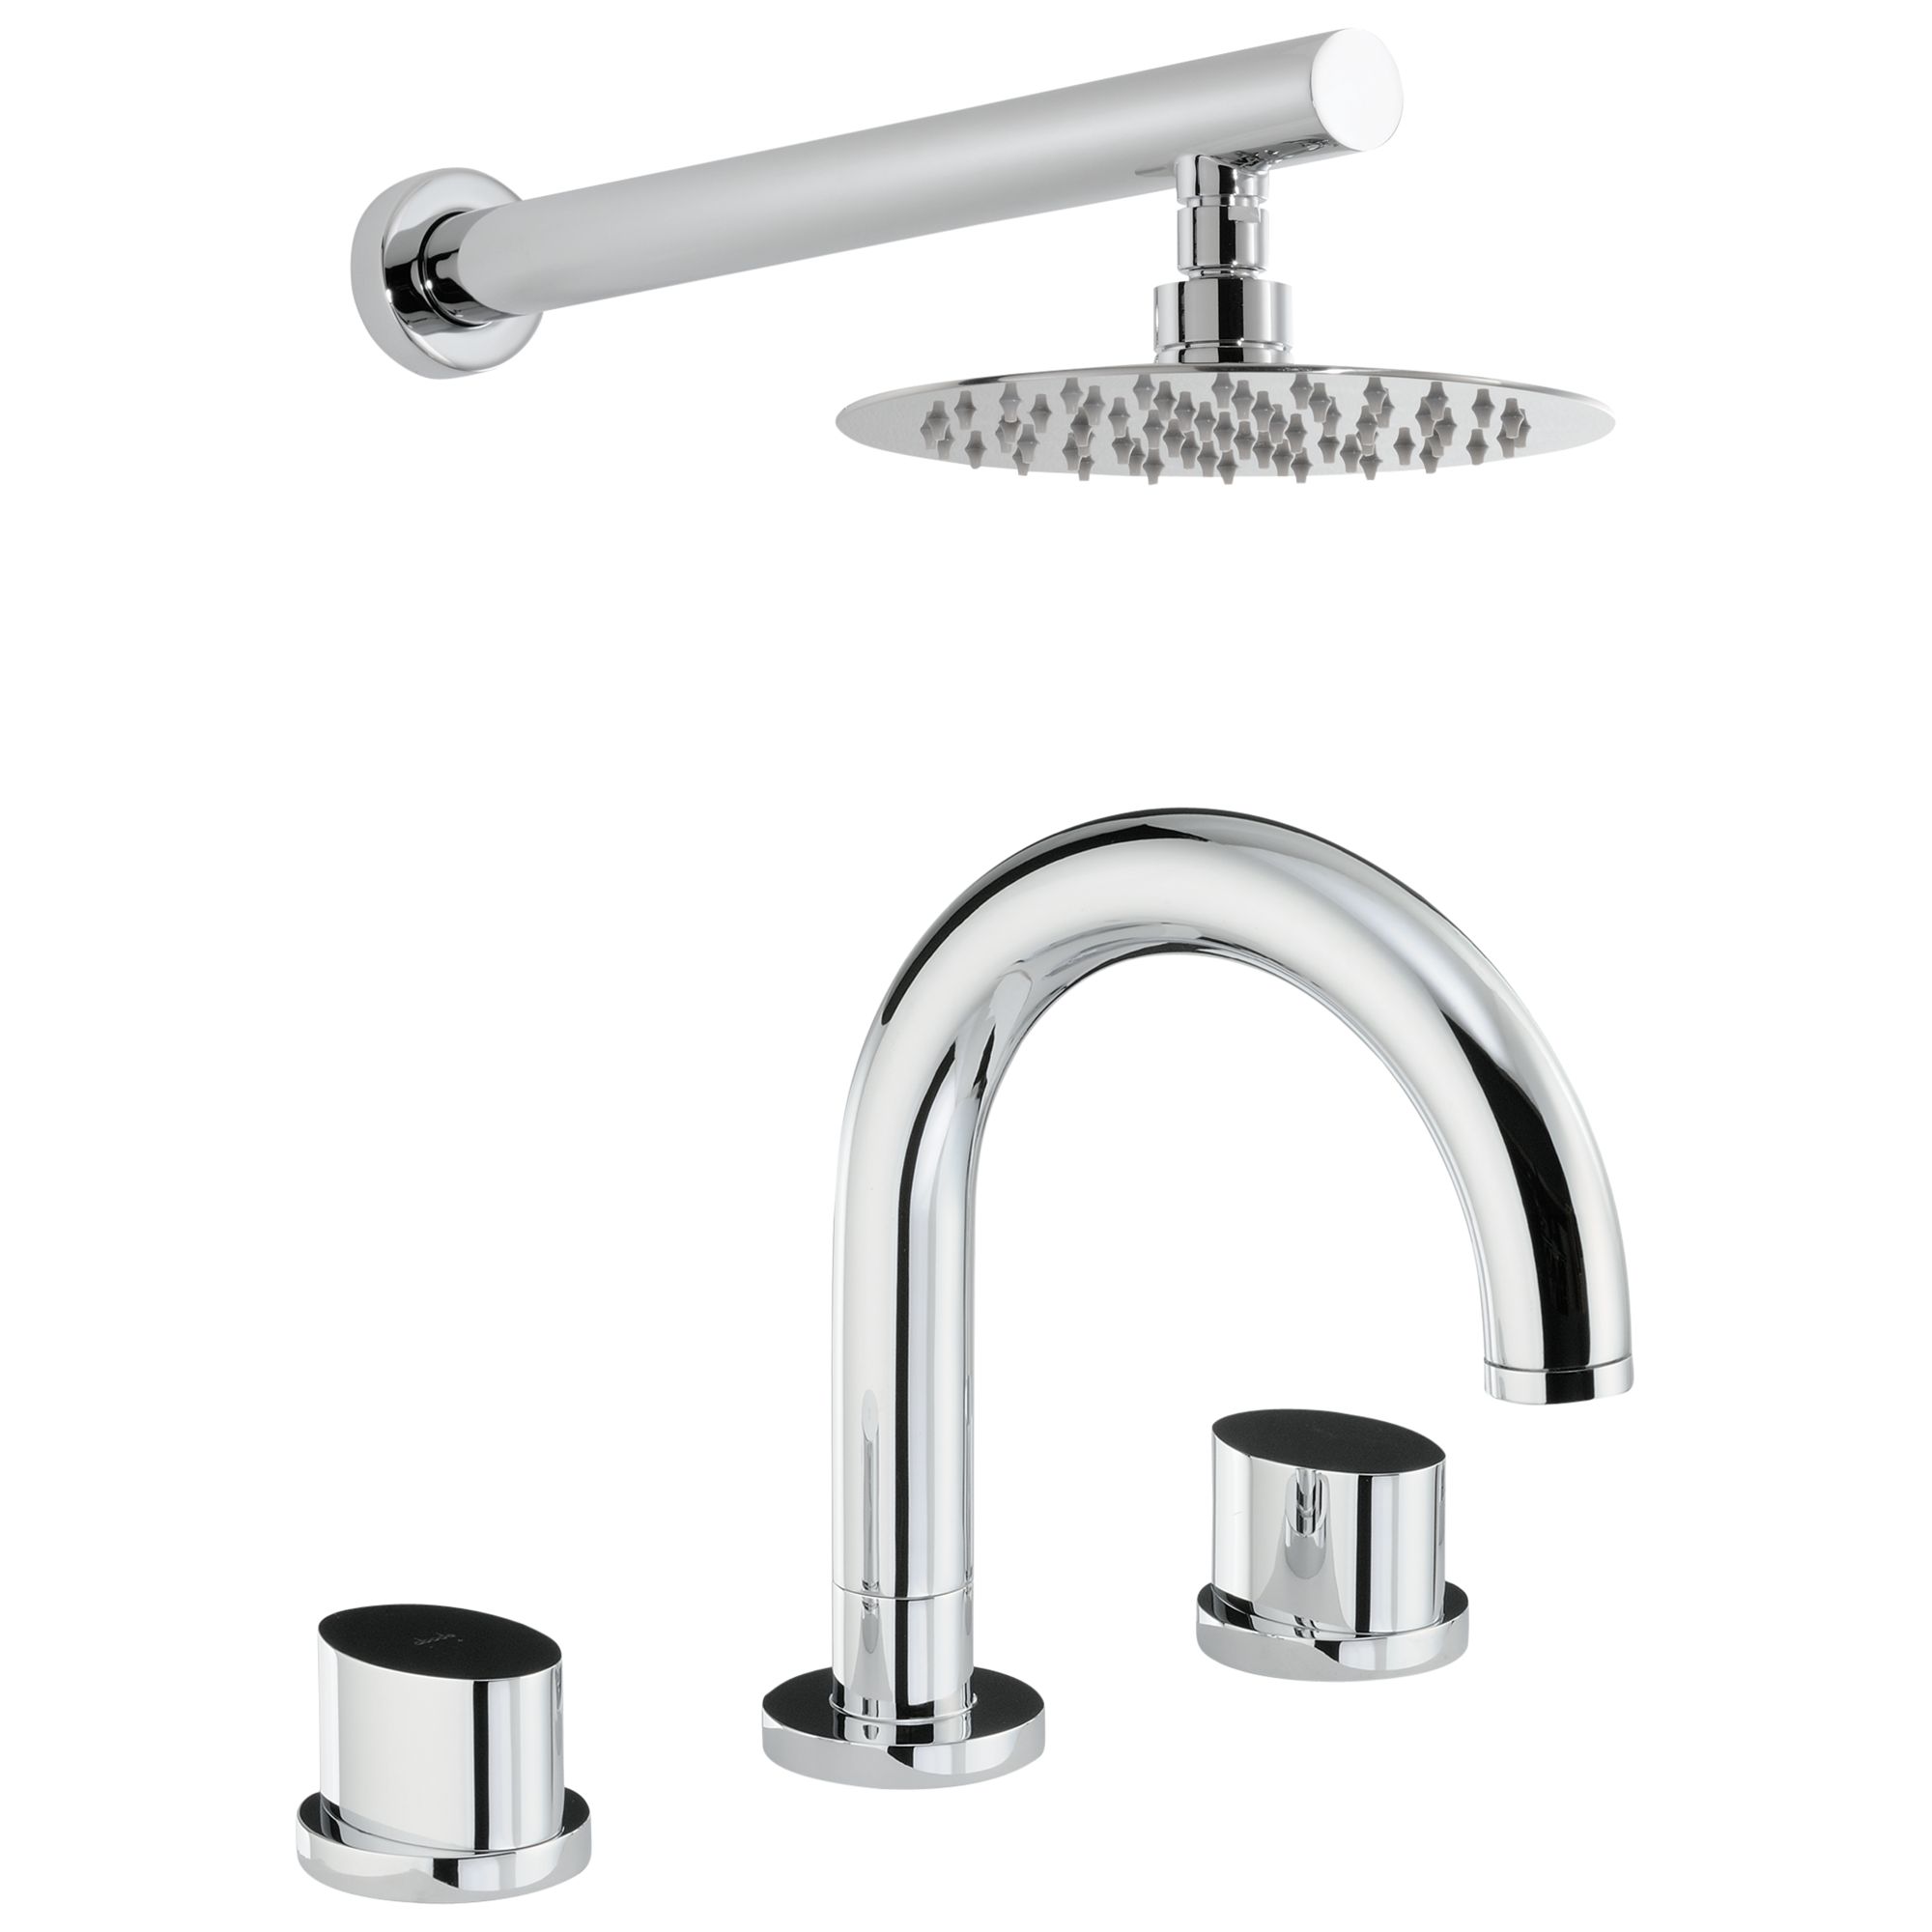 Abode Debut Thermostatic Deck Mounted 3 Hole Bath Mixer Tap and Wall Mounted Shower